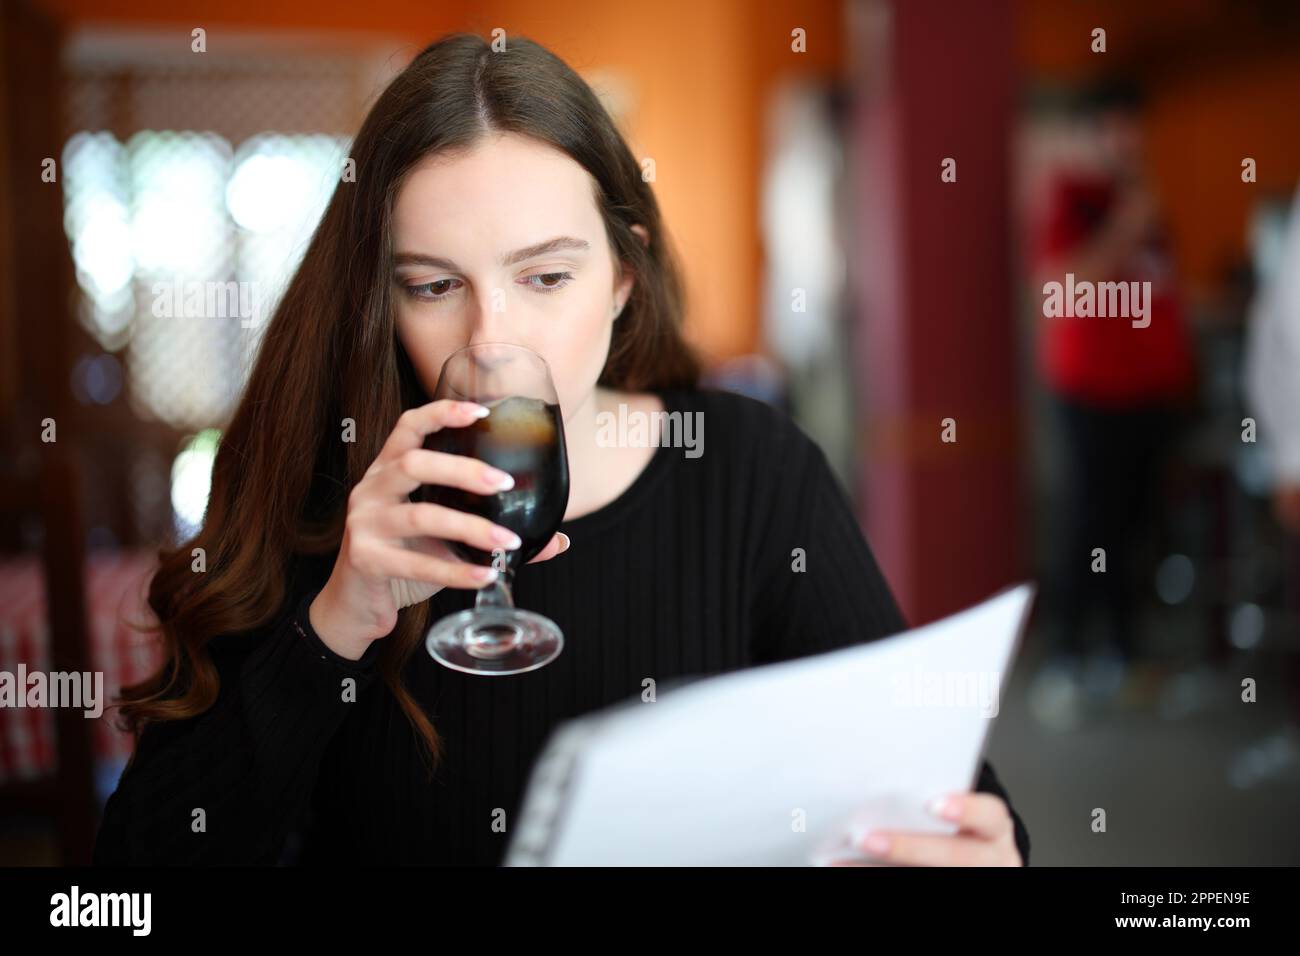 Serious woman drinking and reading menu sitting in a bar Stock Photo